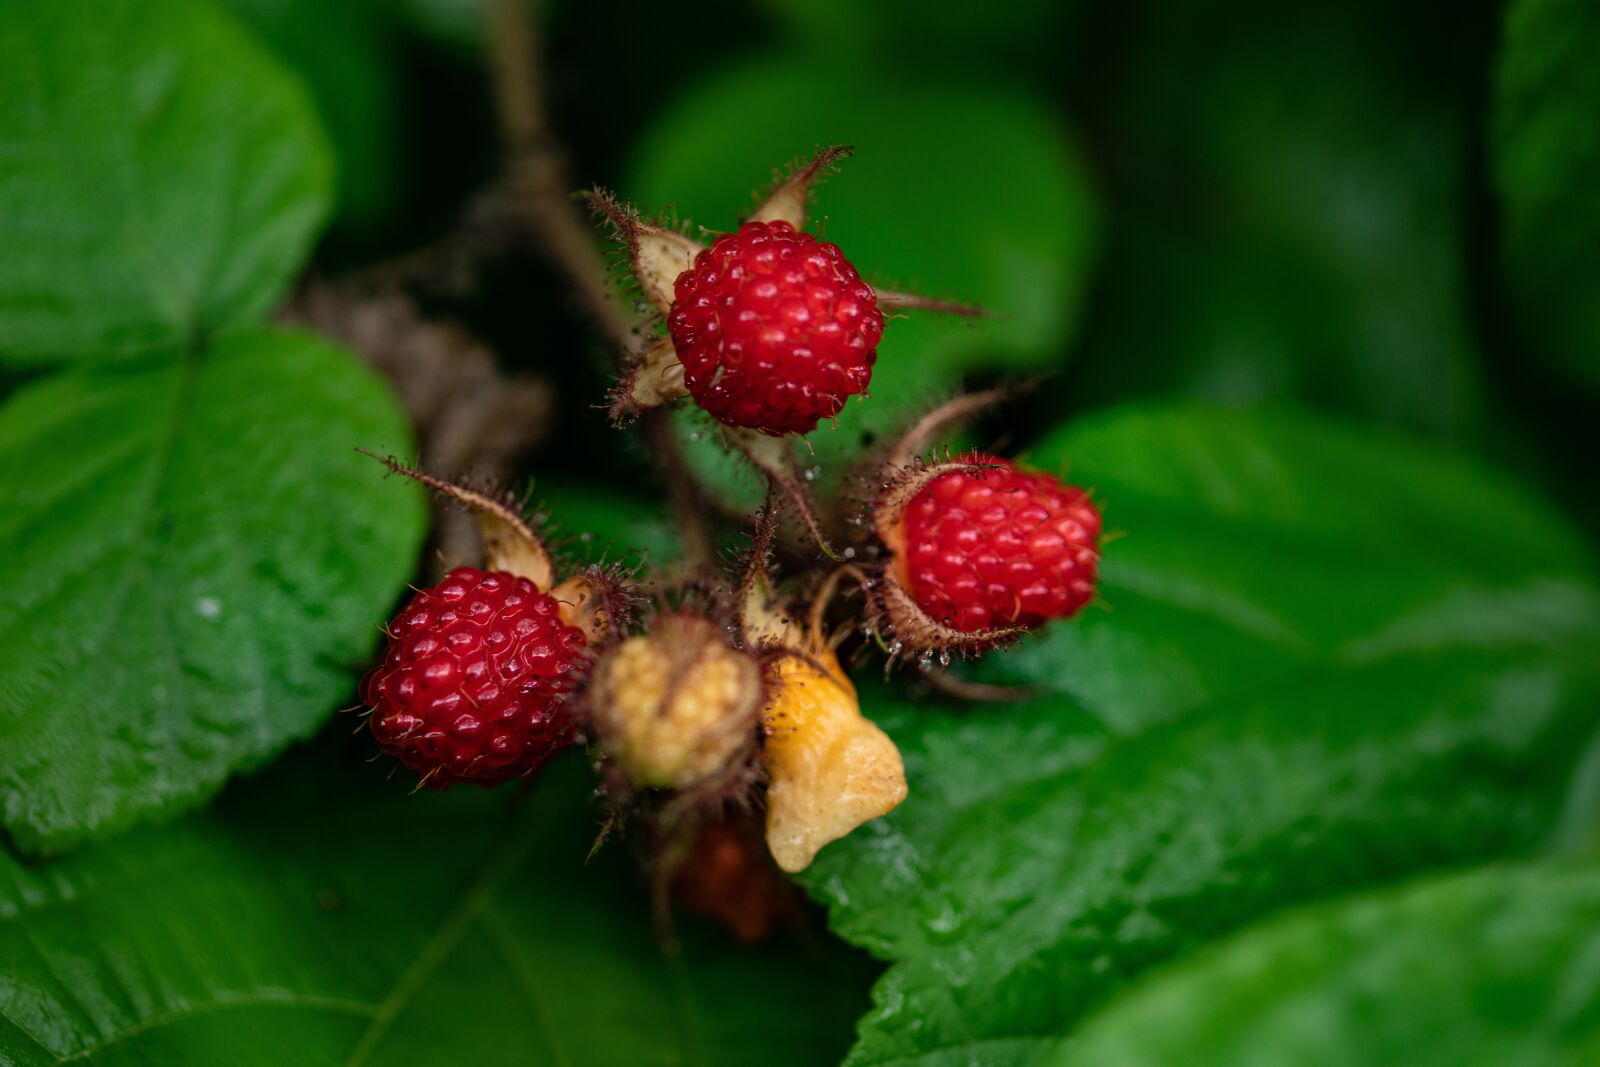 Sony a99 II sample photo. Wild strawberries, red, food photography